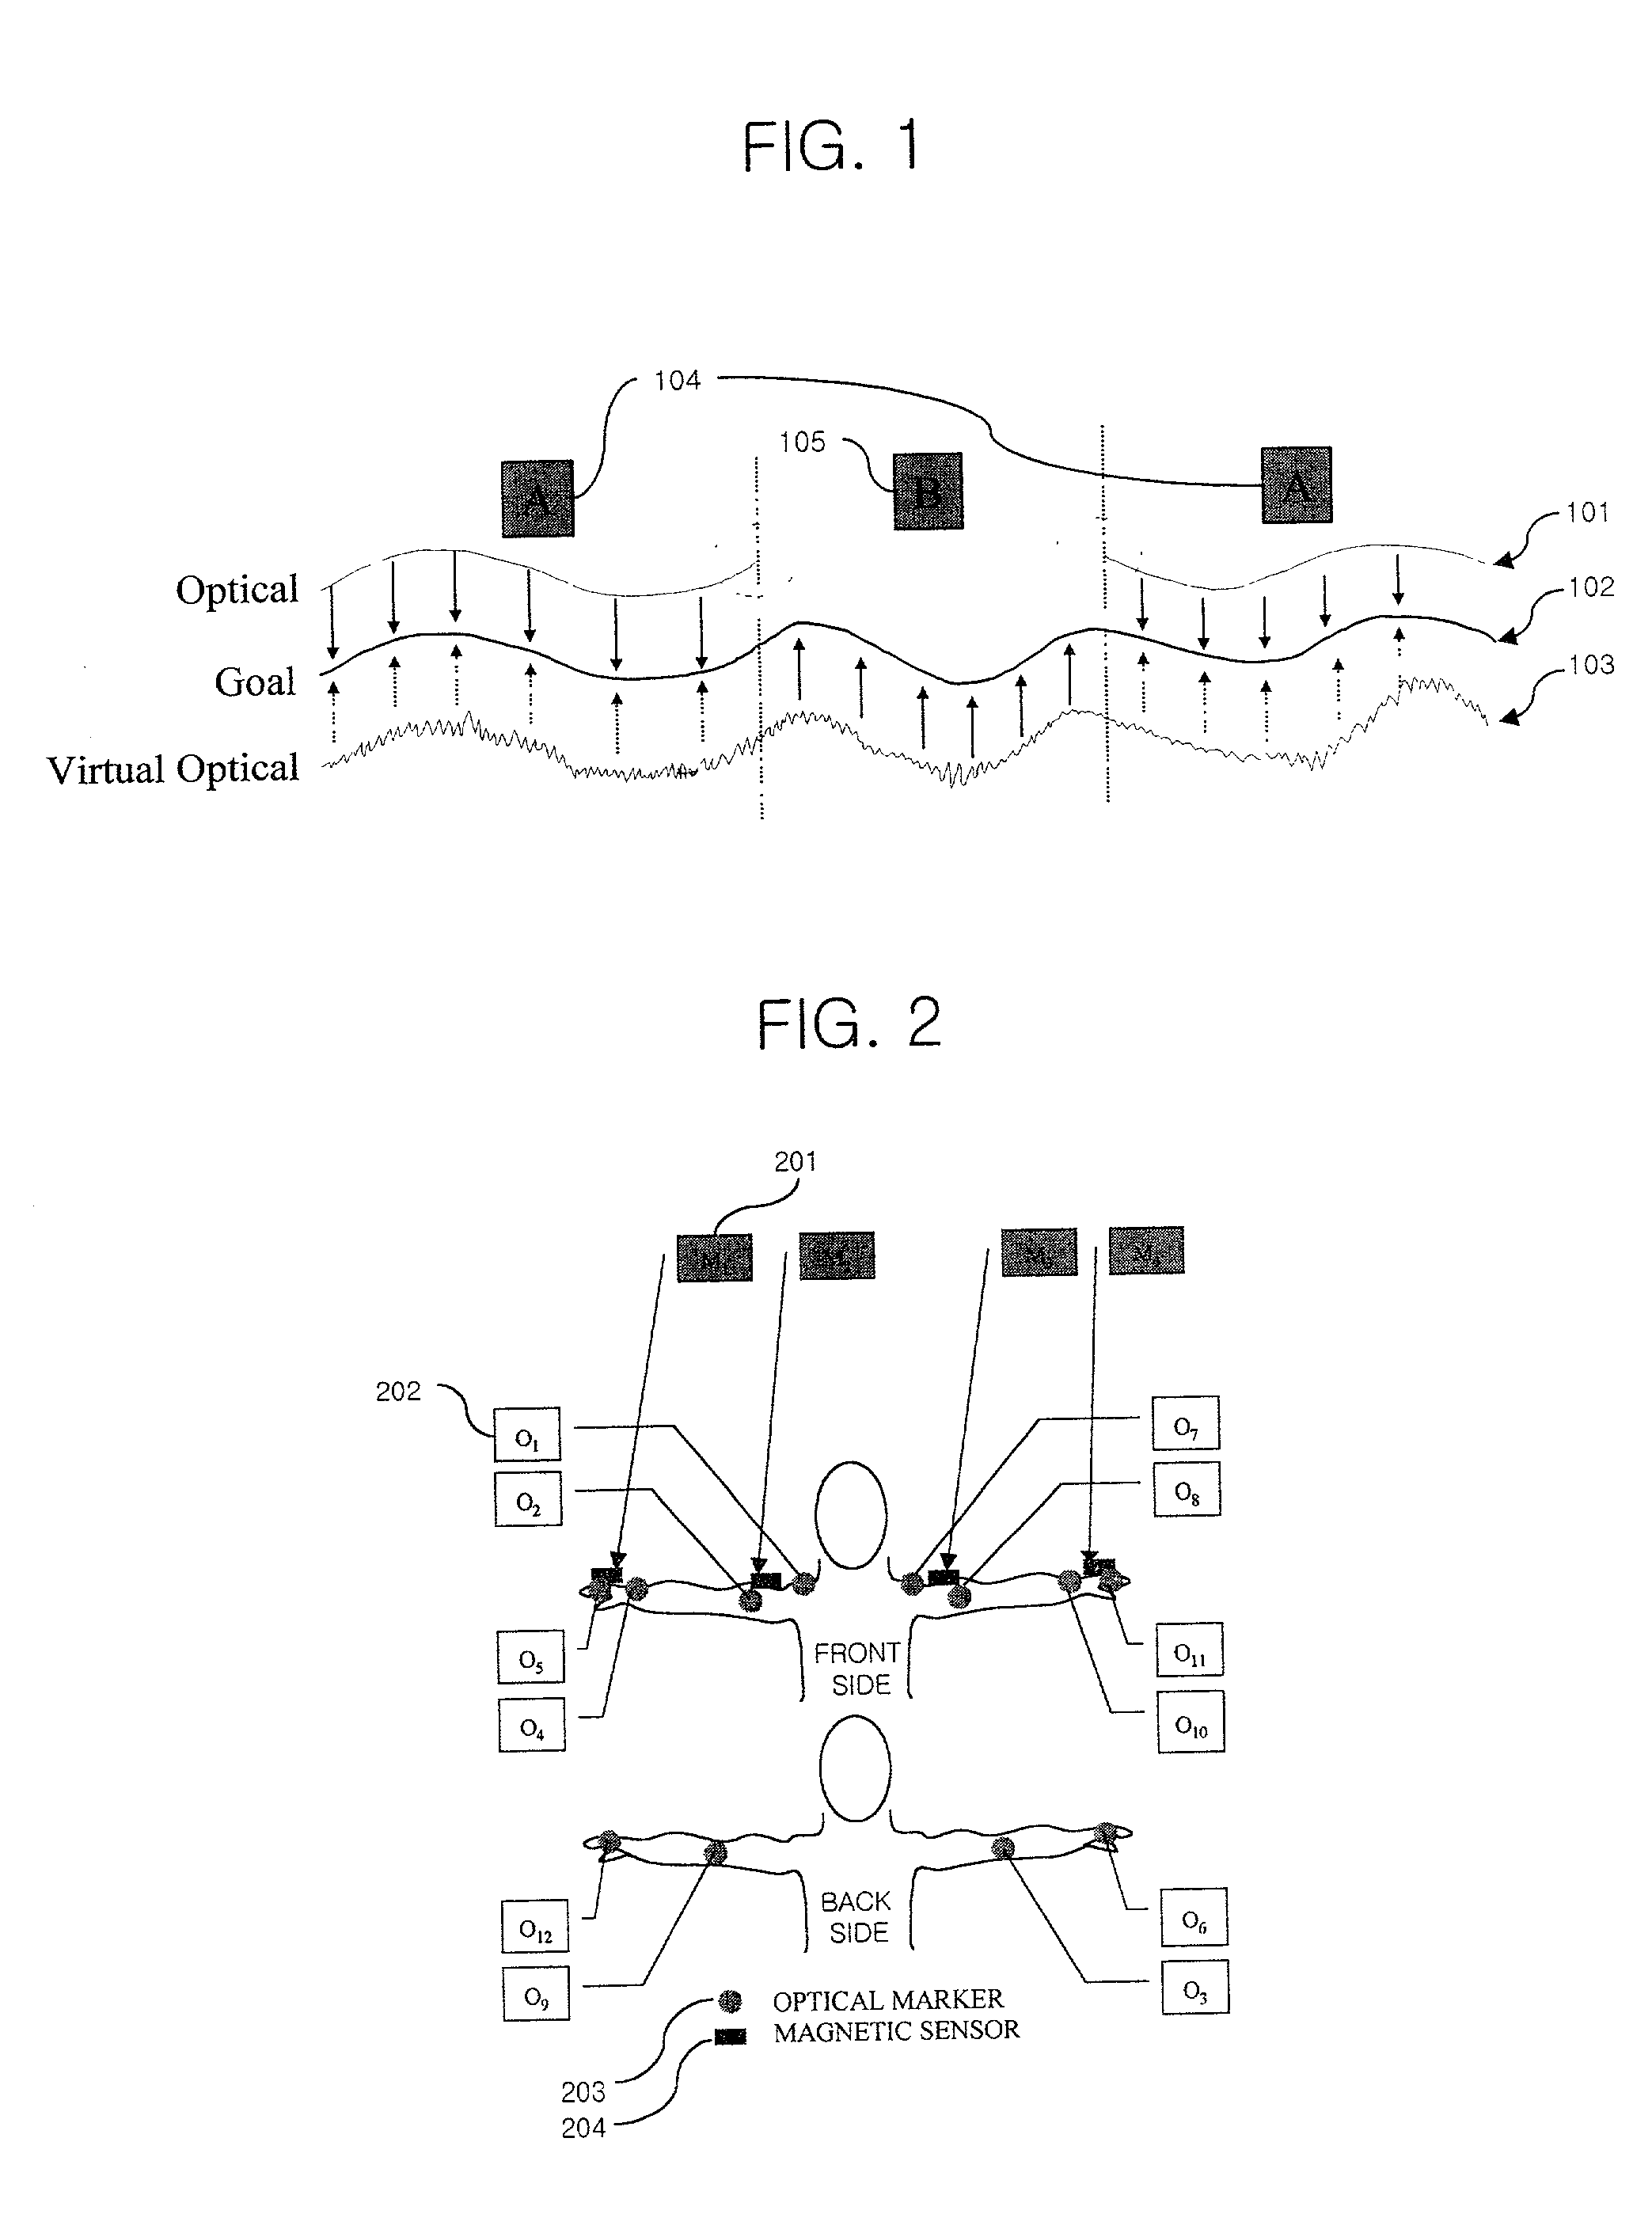 Sensor fusion apparatus and method for optical and magnetic motion capture systems